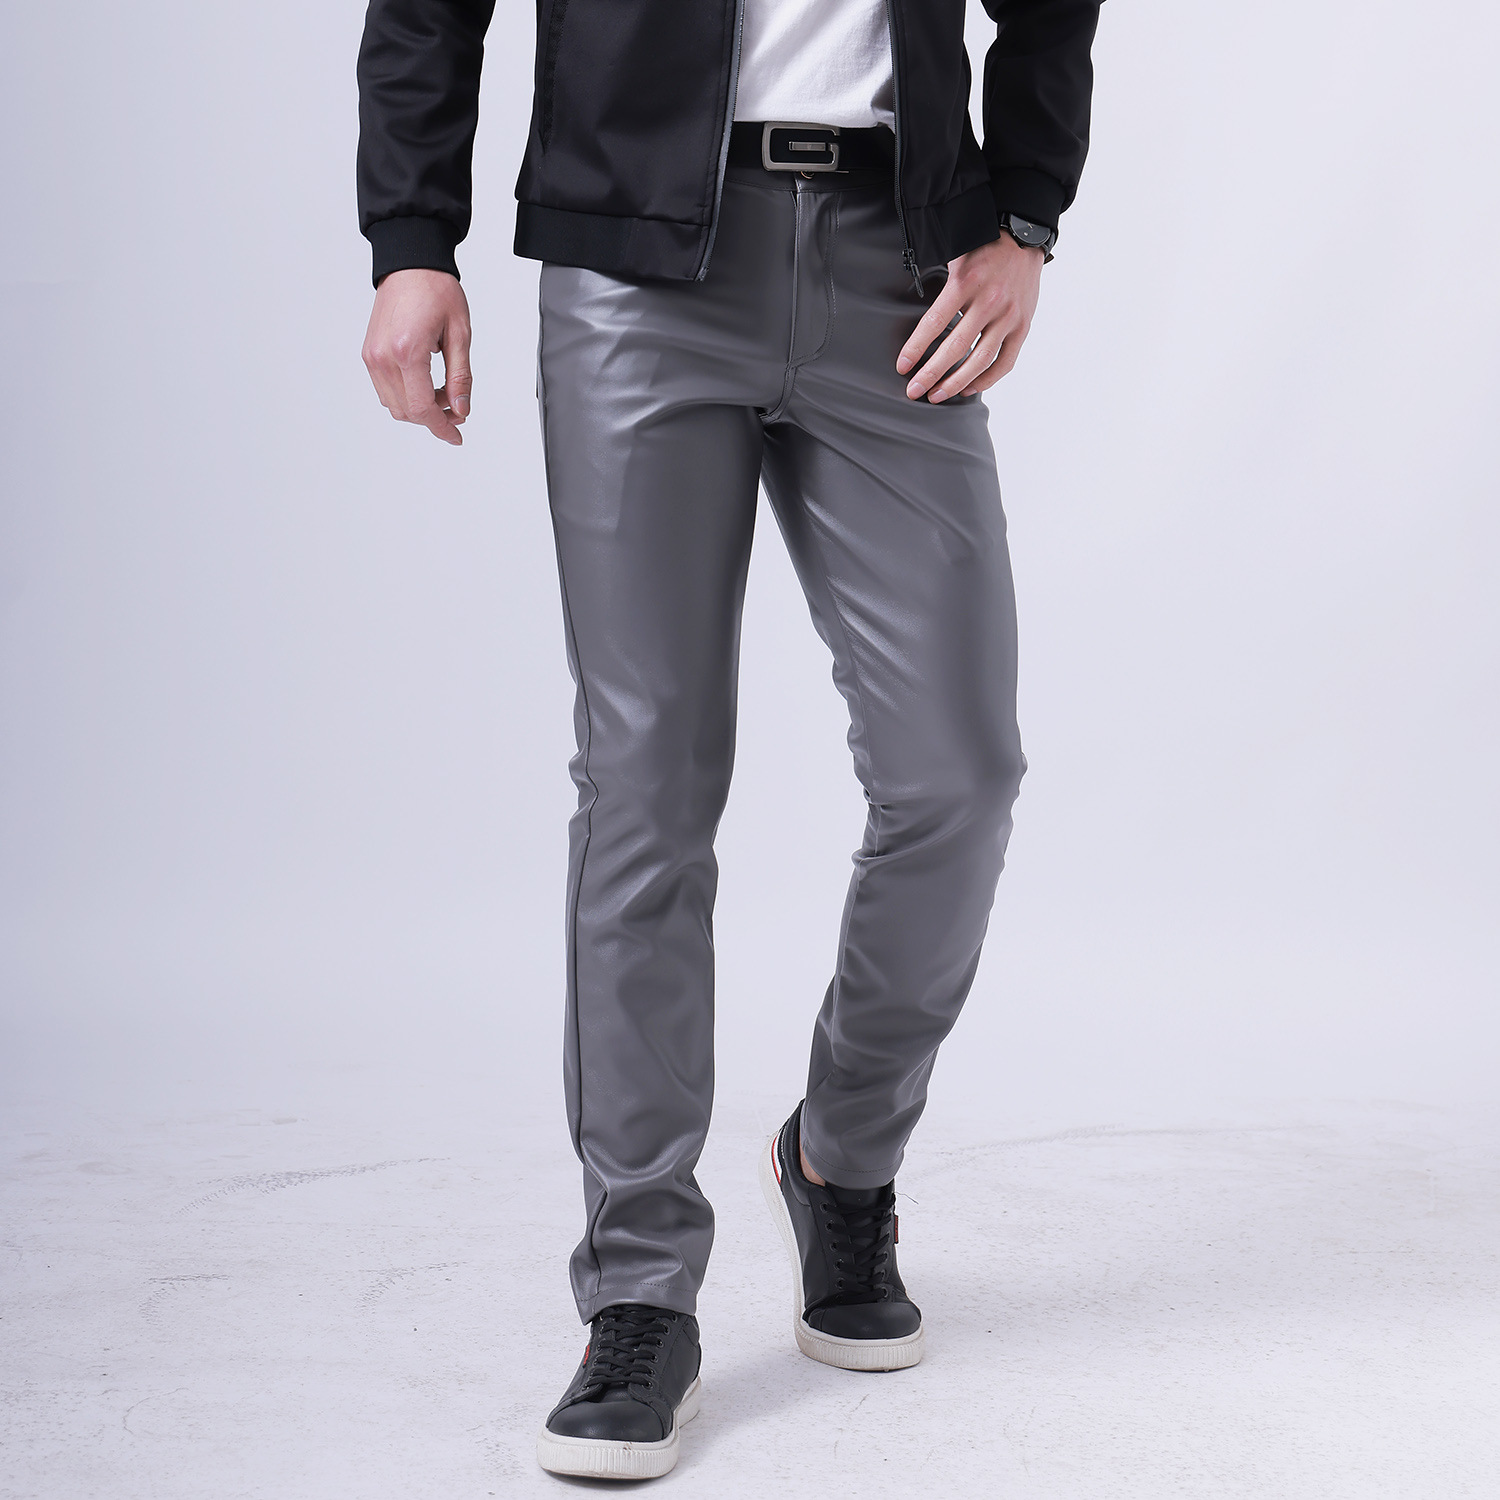 Trendy Colored Stretch Slim Leather Pants